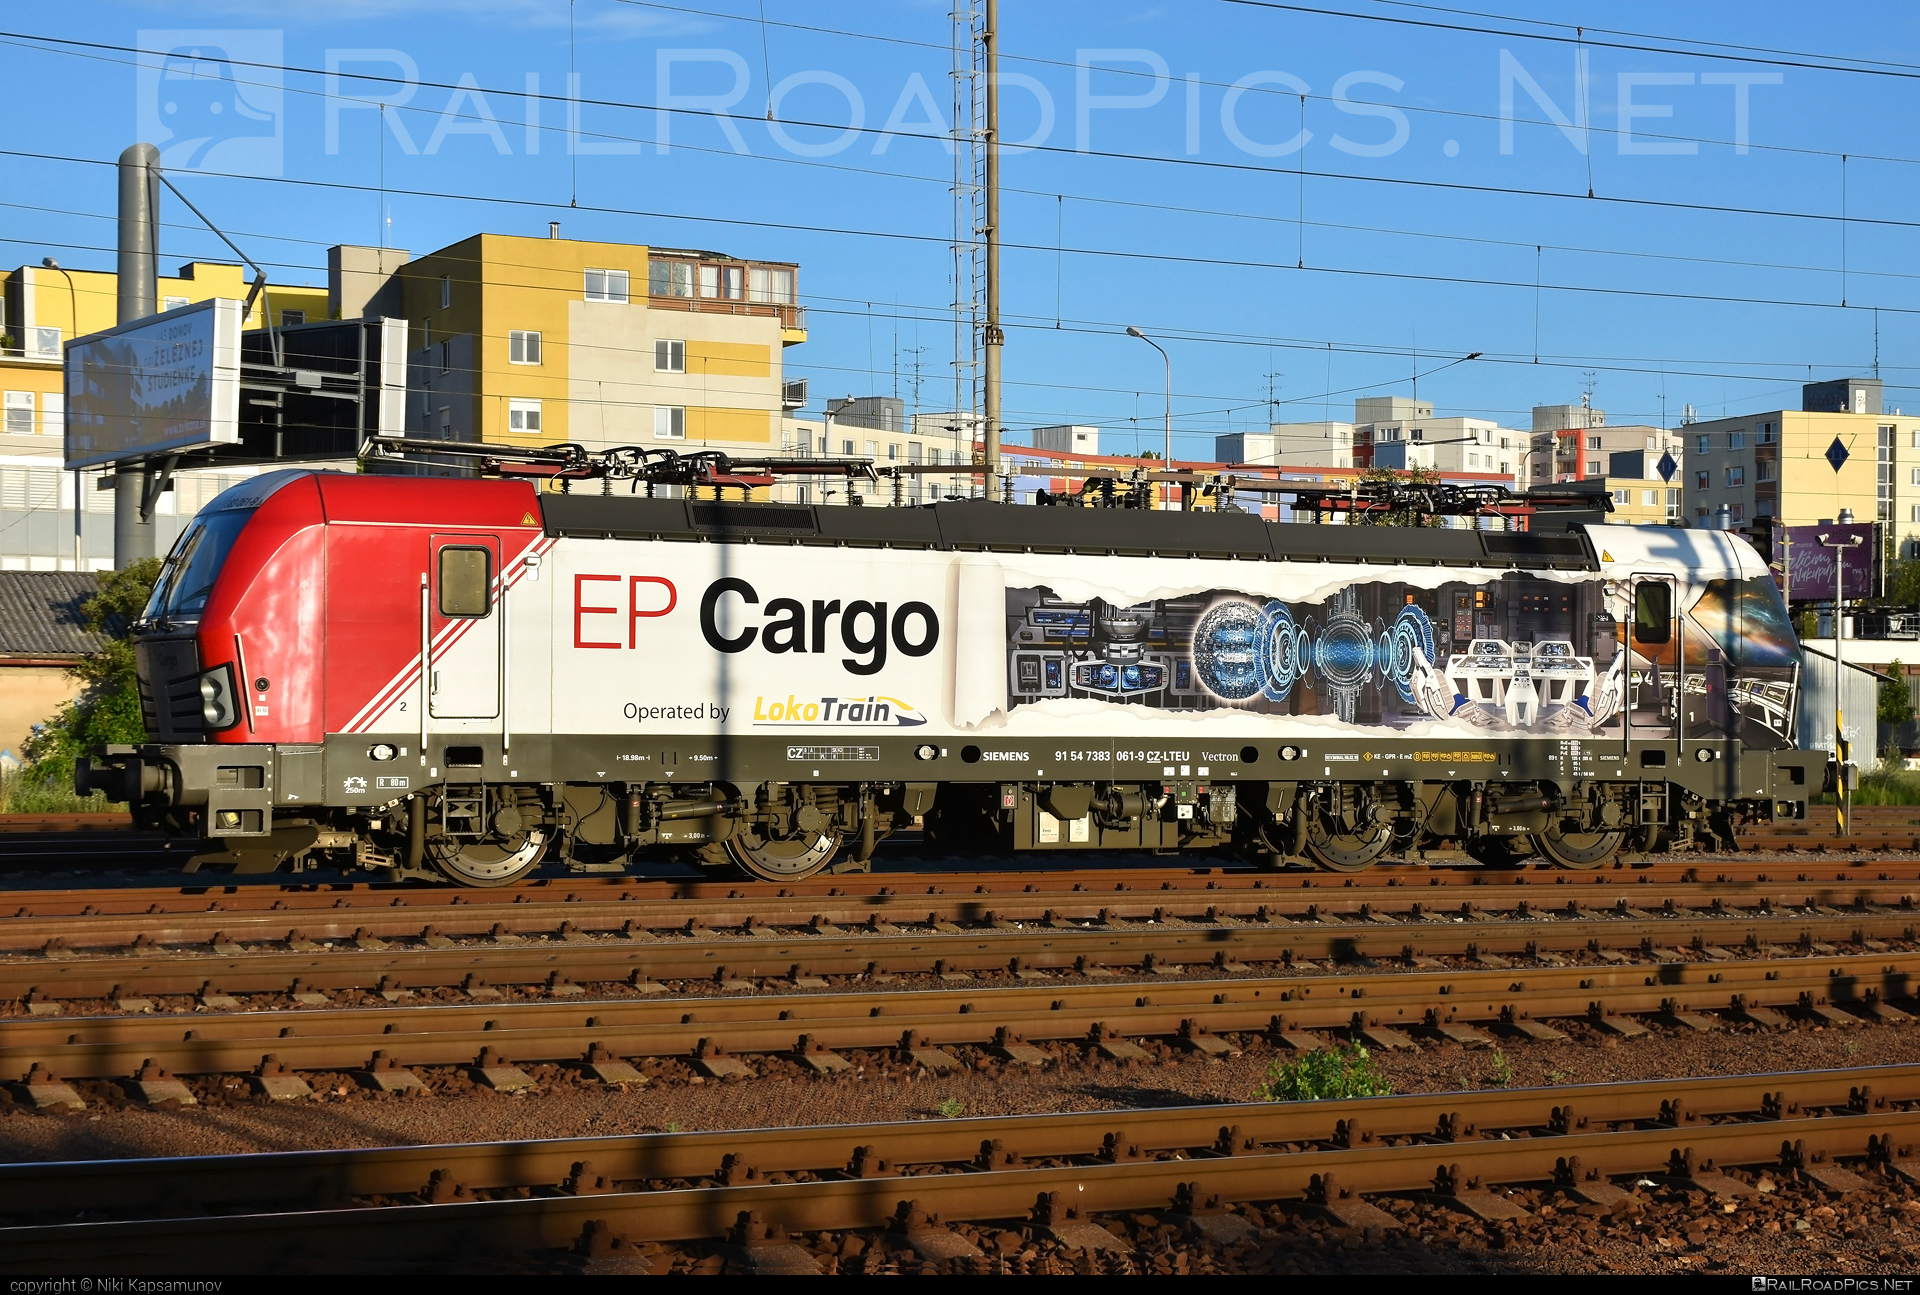 Siemens Vectron MS - 383 061-9 operated by Loko Train s.r.o. #epcargo #lokotrain #lokotrainsro #siemens #siemensVectron #siemensVectronMS #vectron #vectronMS